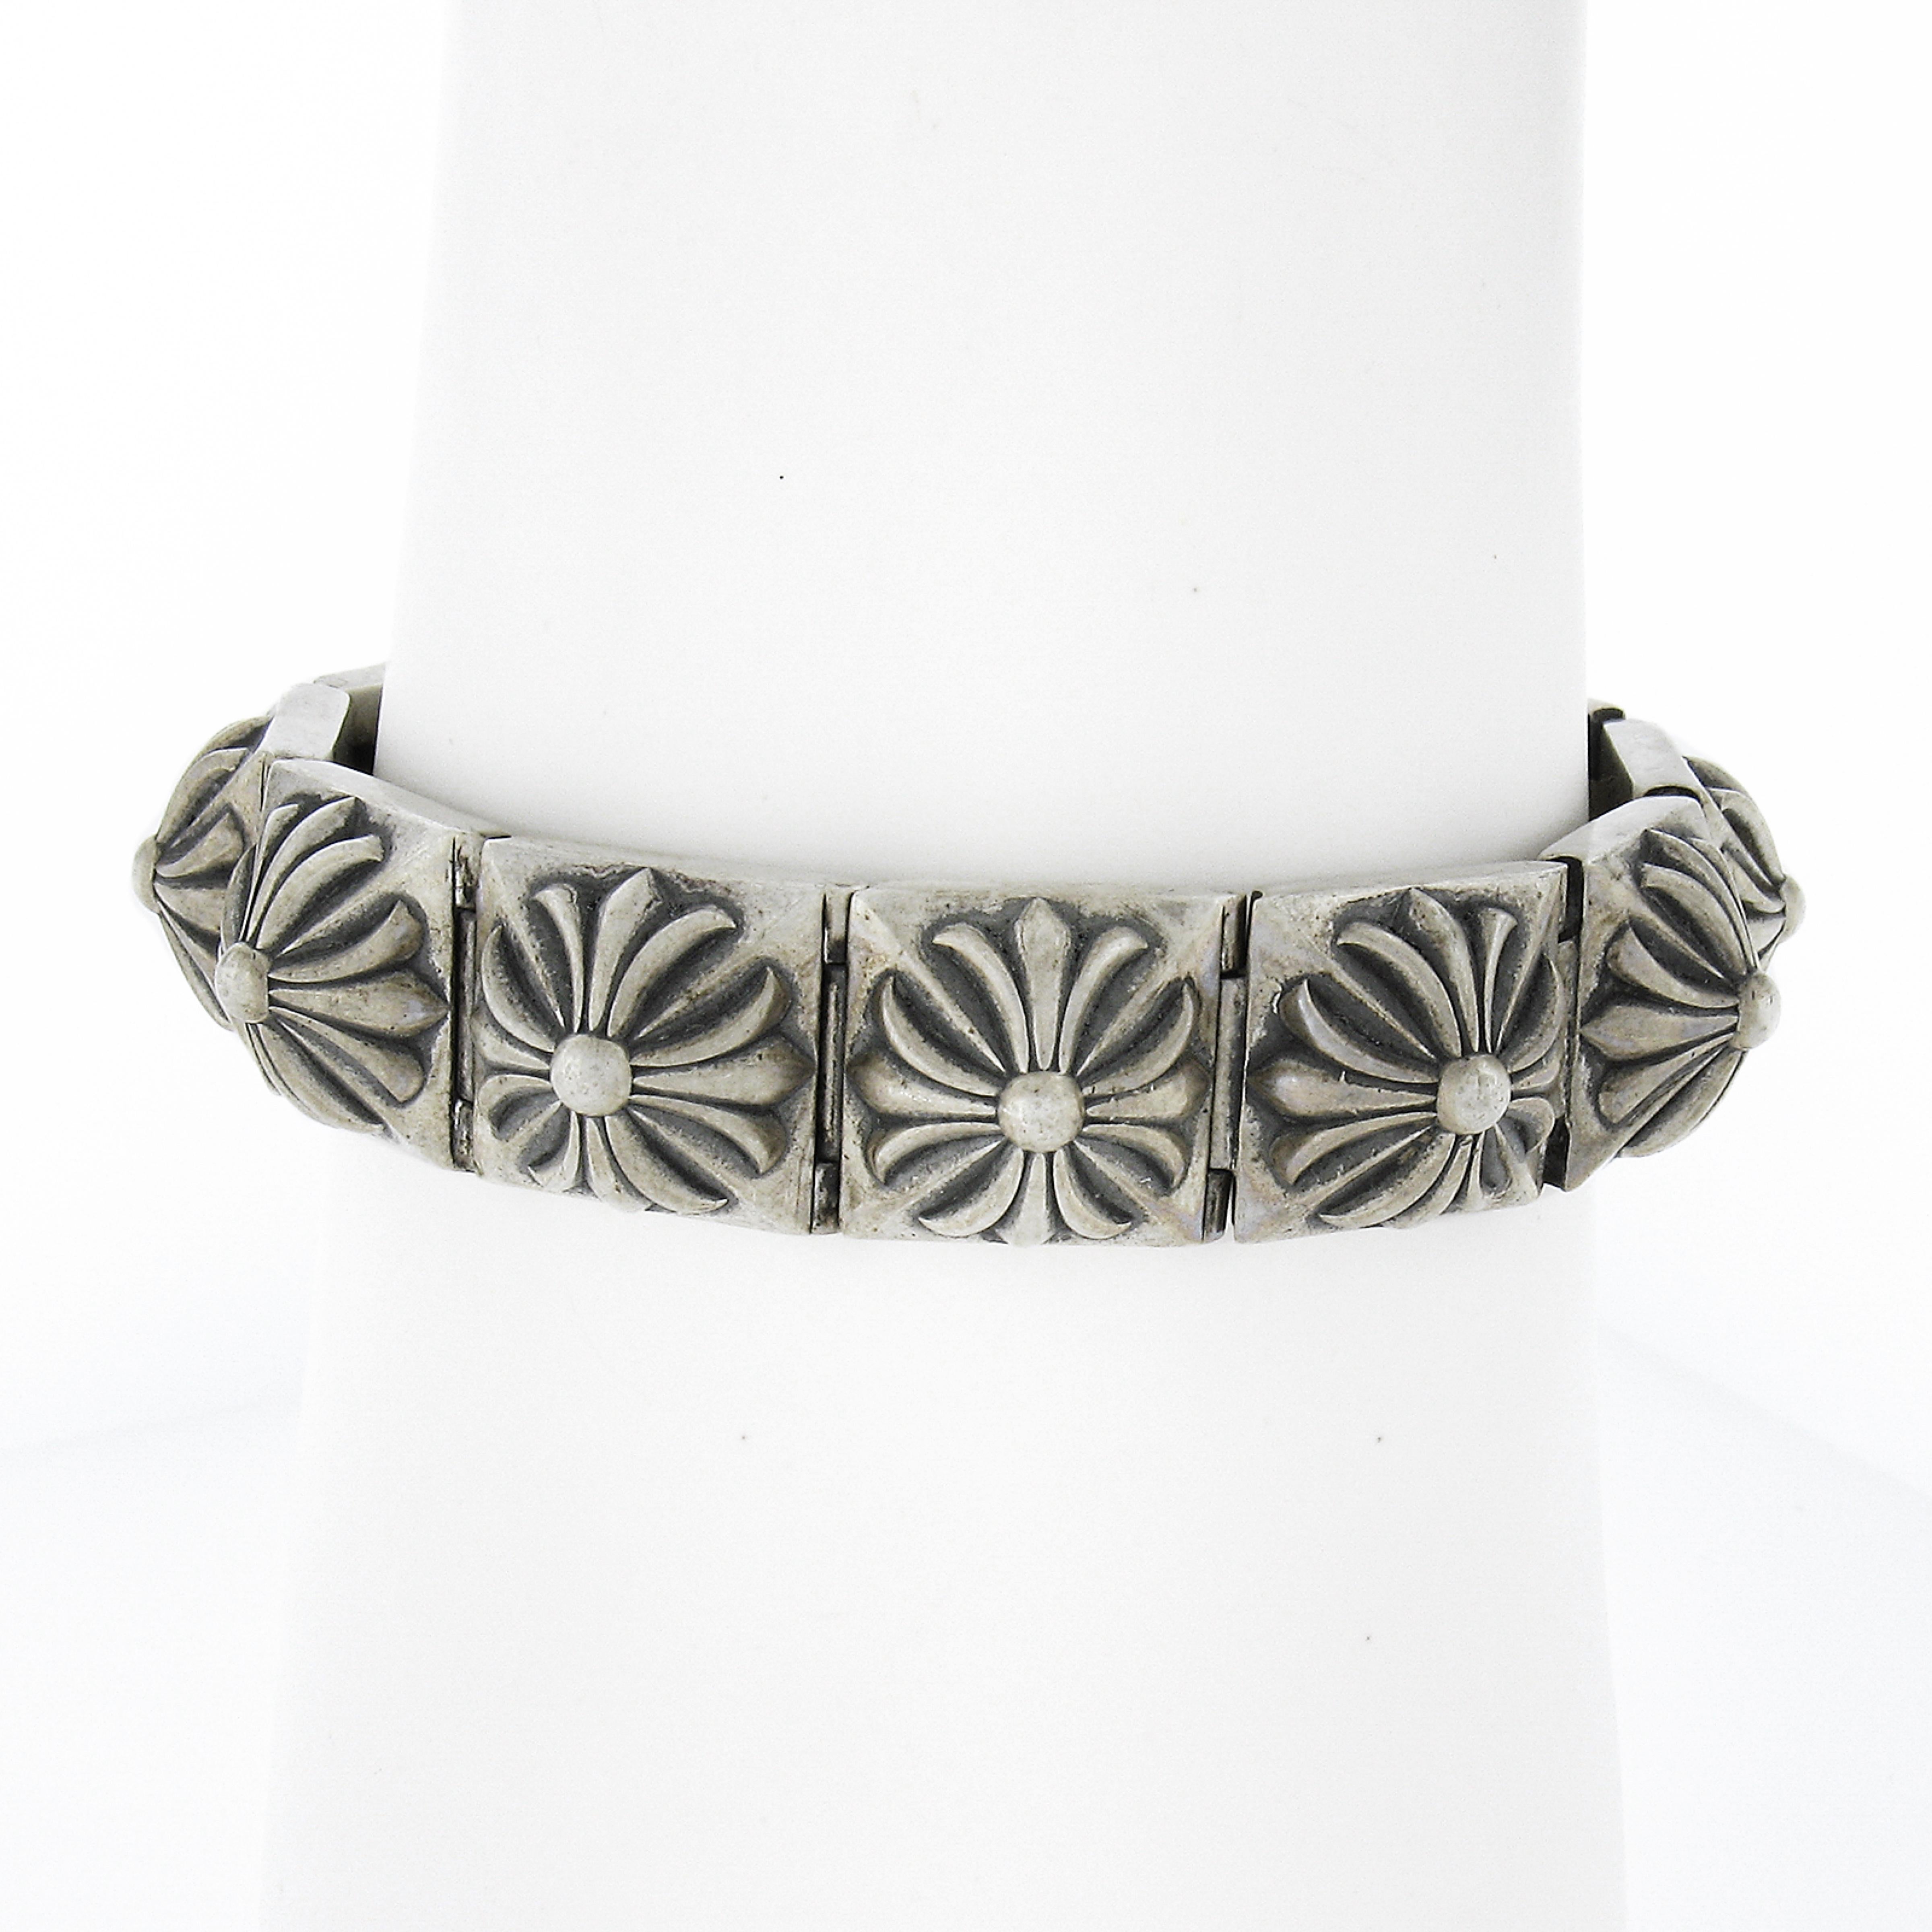 This truly bold and unique piece from Chrome Hearts features a floral square Pete Punk link design from 2012 and is signed properly at the back of every link. The bracelet is heavy, wide and is guaranteed to stand out with its wonderful design.